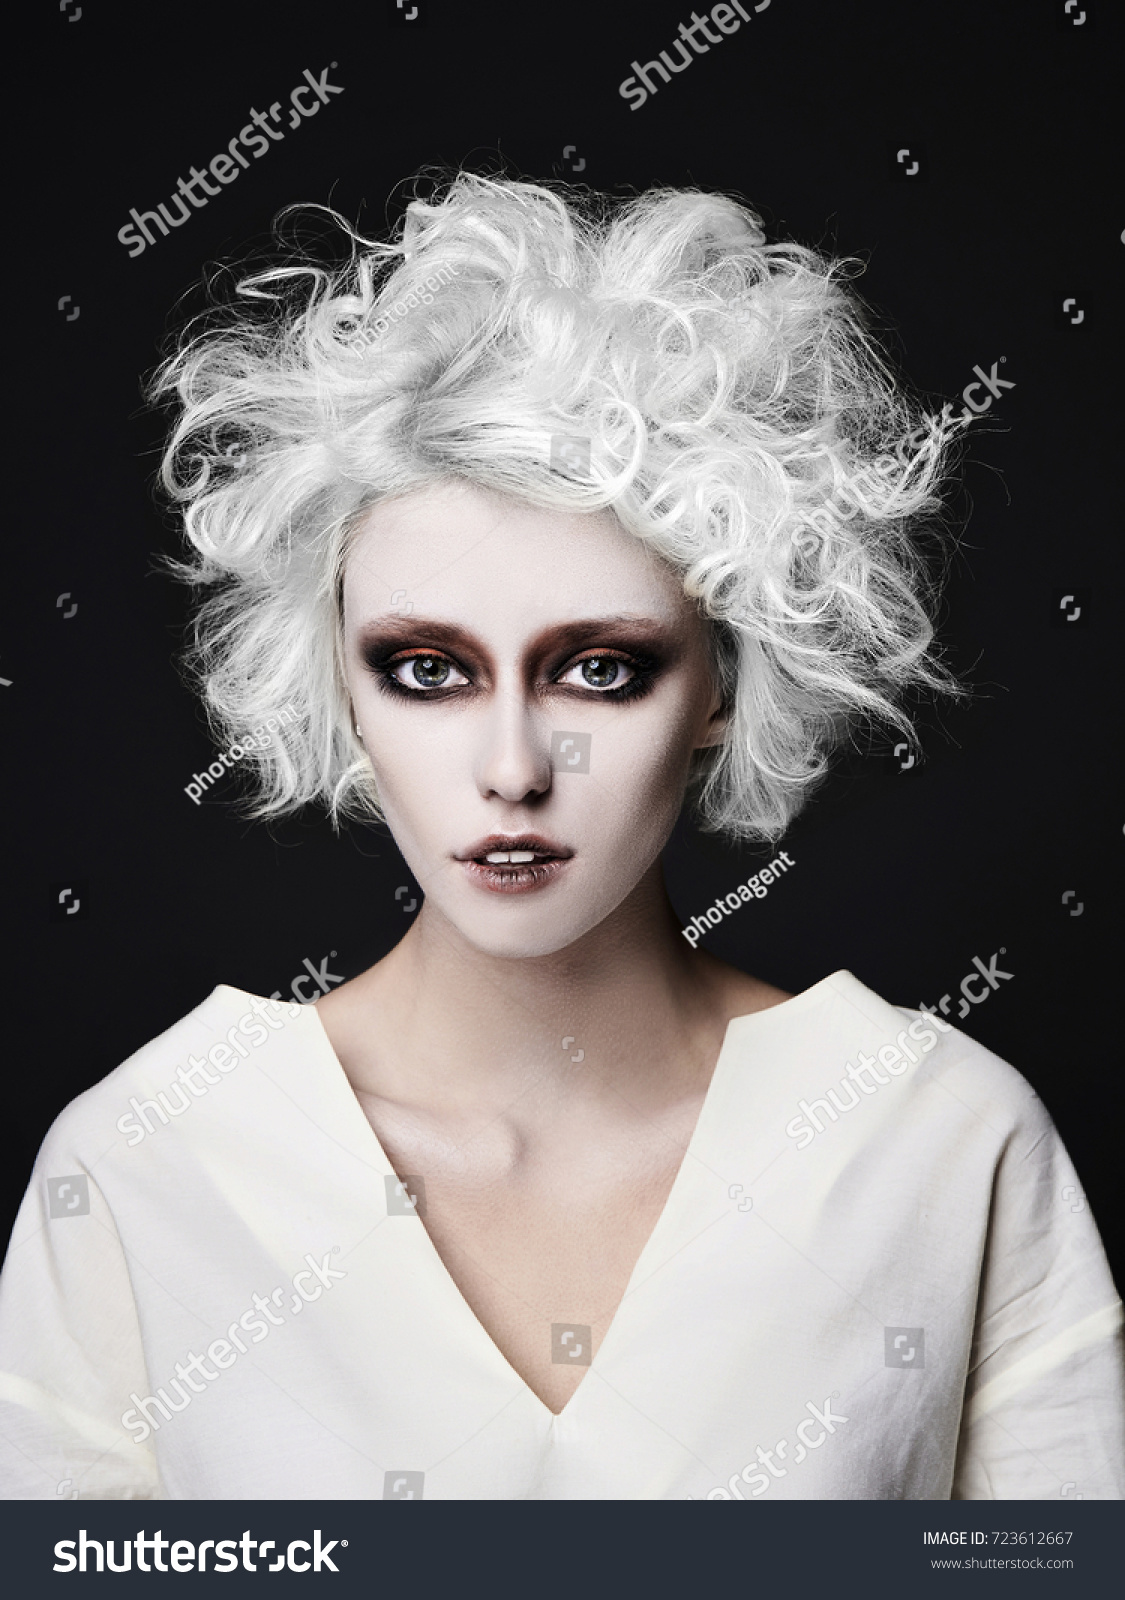 stock photo girl with scary clown make up for halloween blond young woman with white skin wear straitjacket 723612667